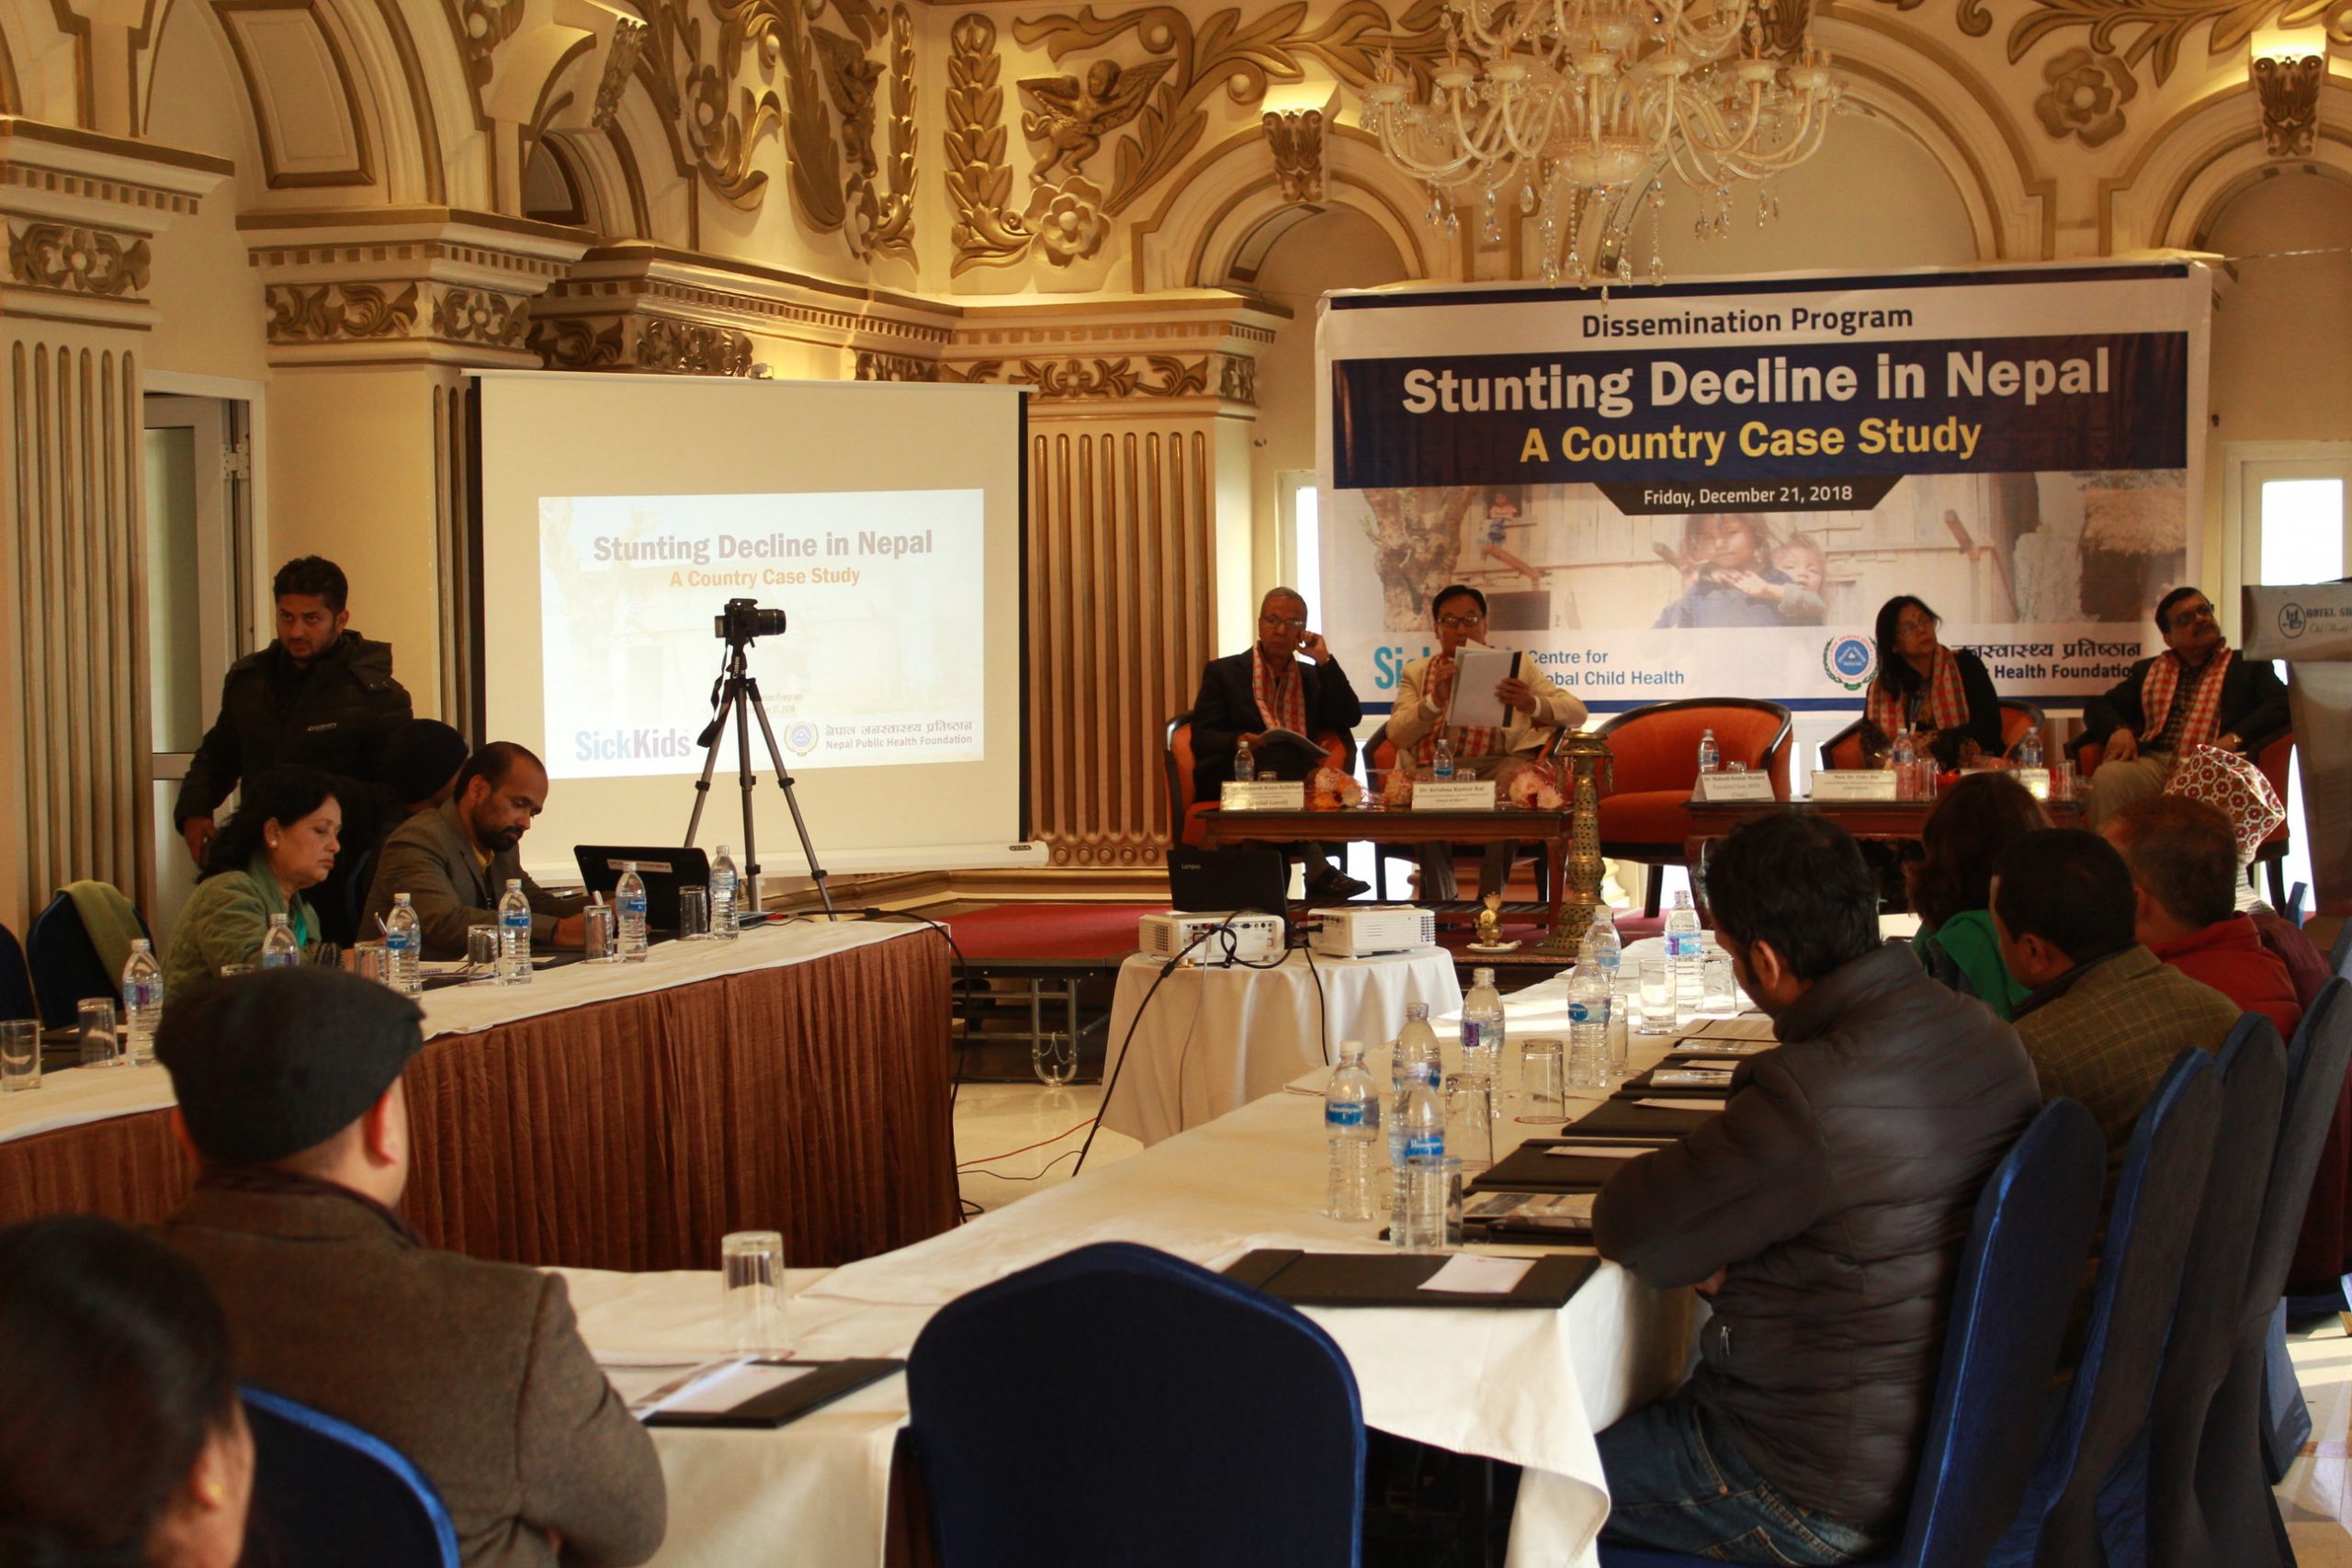 NPHF successfully conducted dissemination of ‘Stunting Decline in Nepal: A Country Case Study’ on December 21, 2018